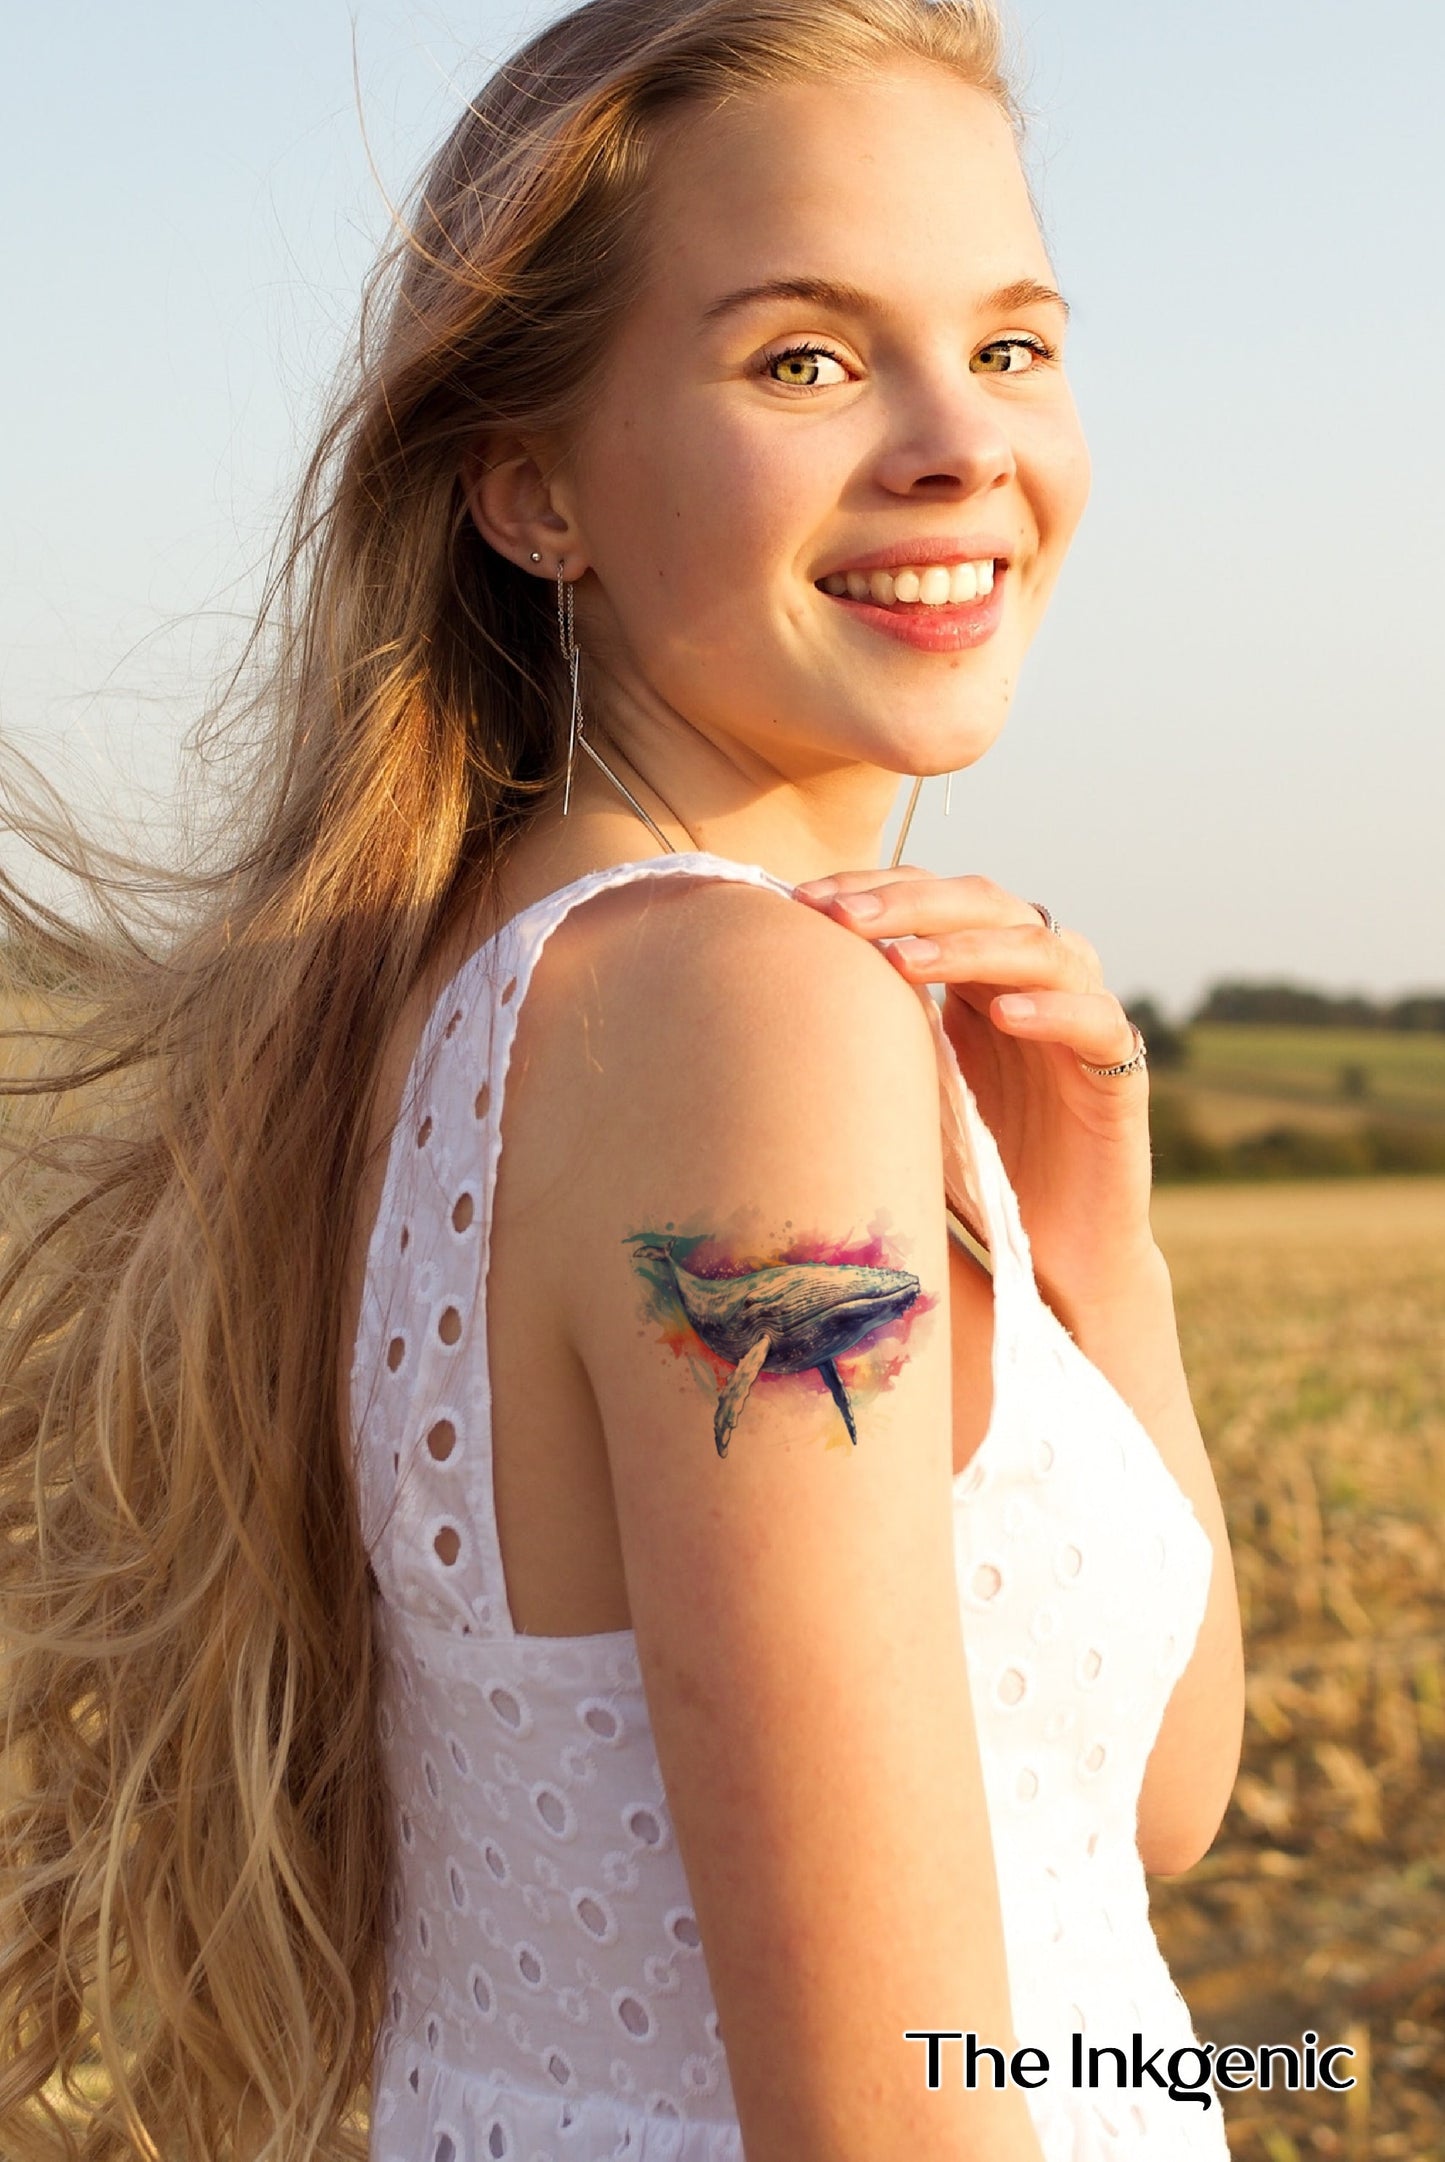 Watercolor Whale Set - Temporary Tattoos